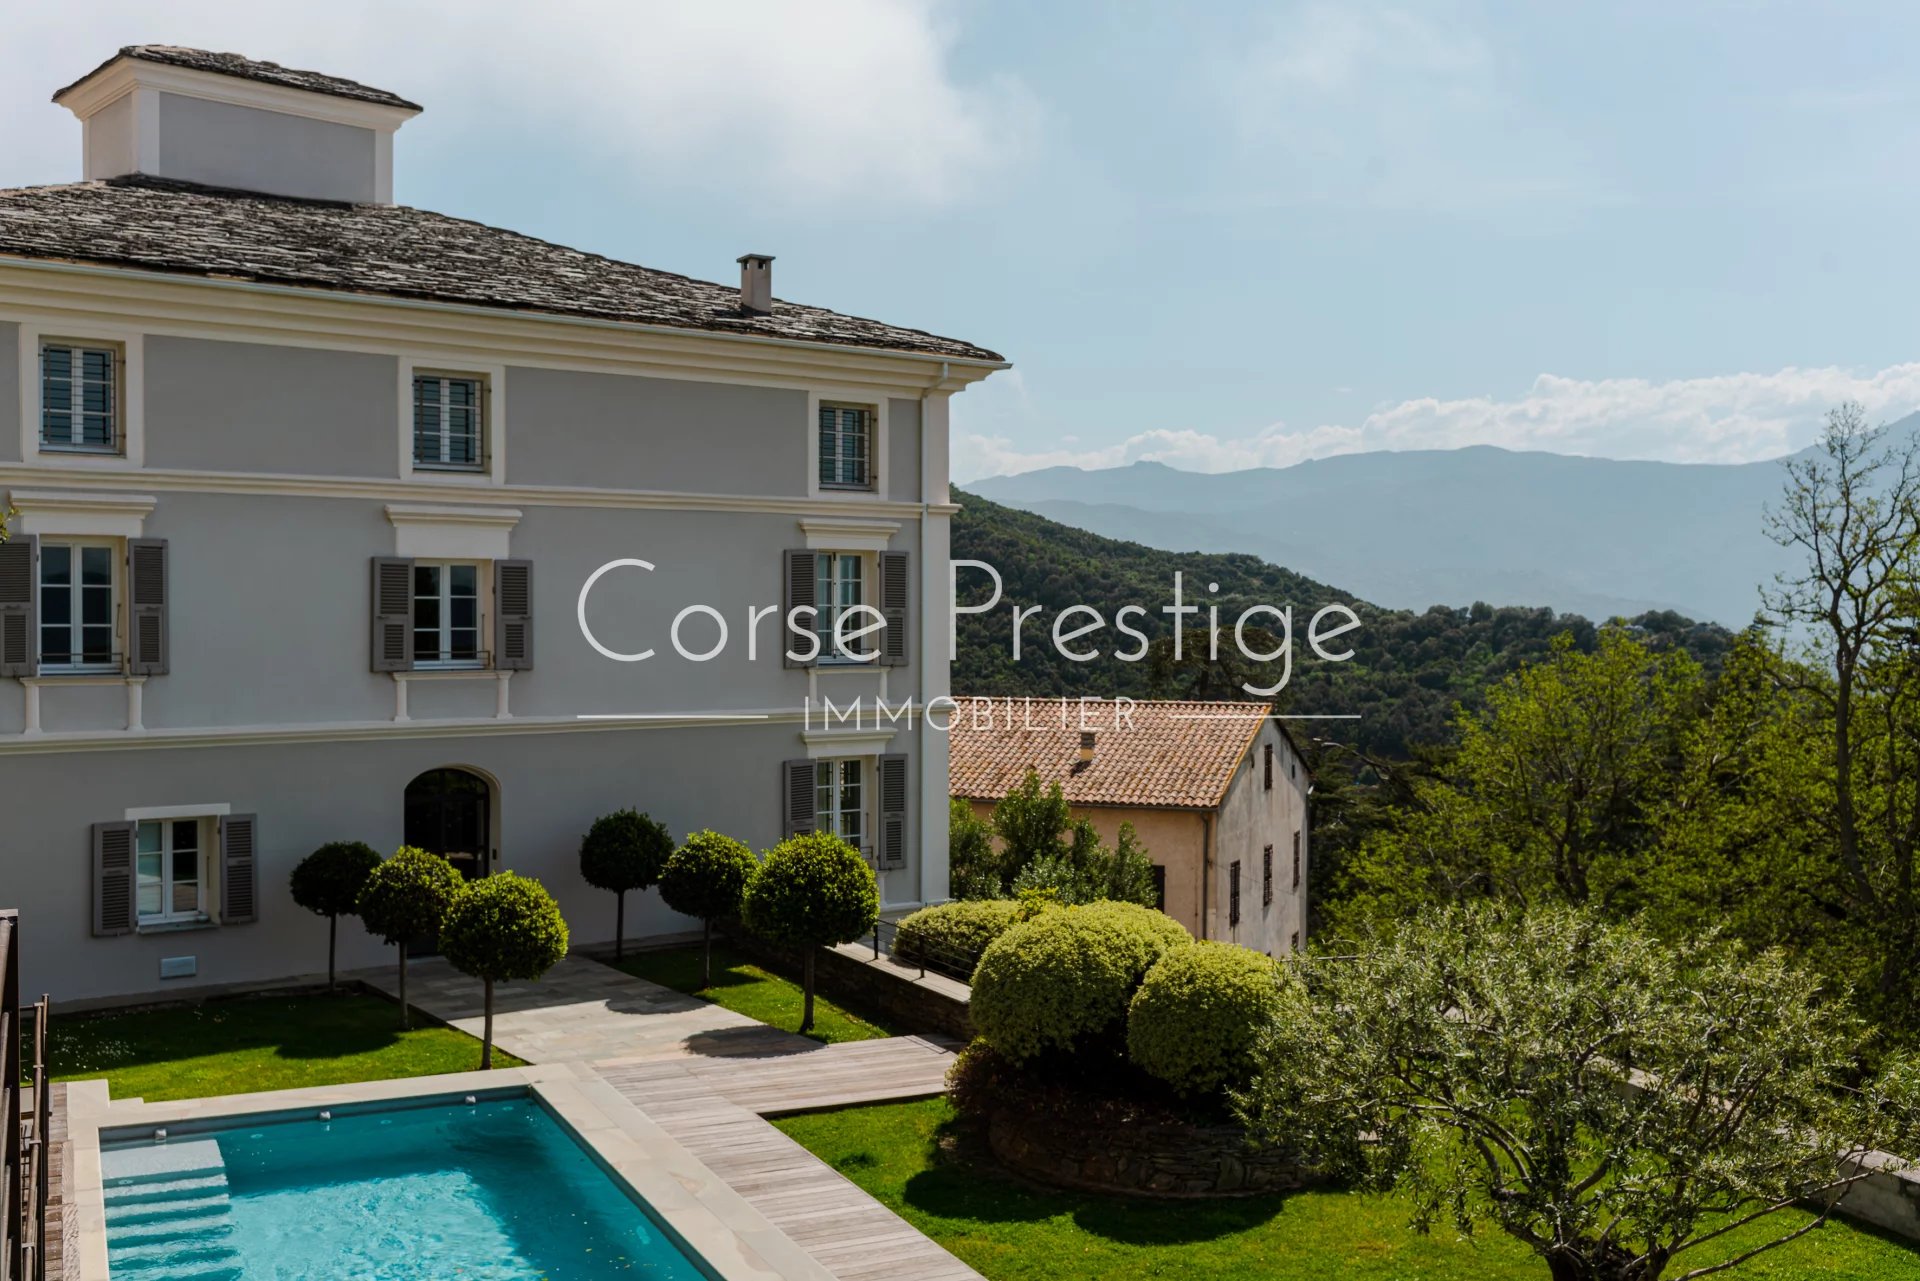 boutik hotel for sale in corsica - authentic mansion image2